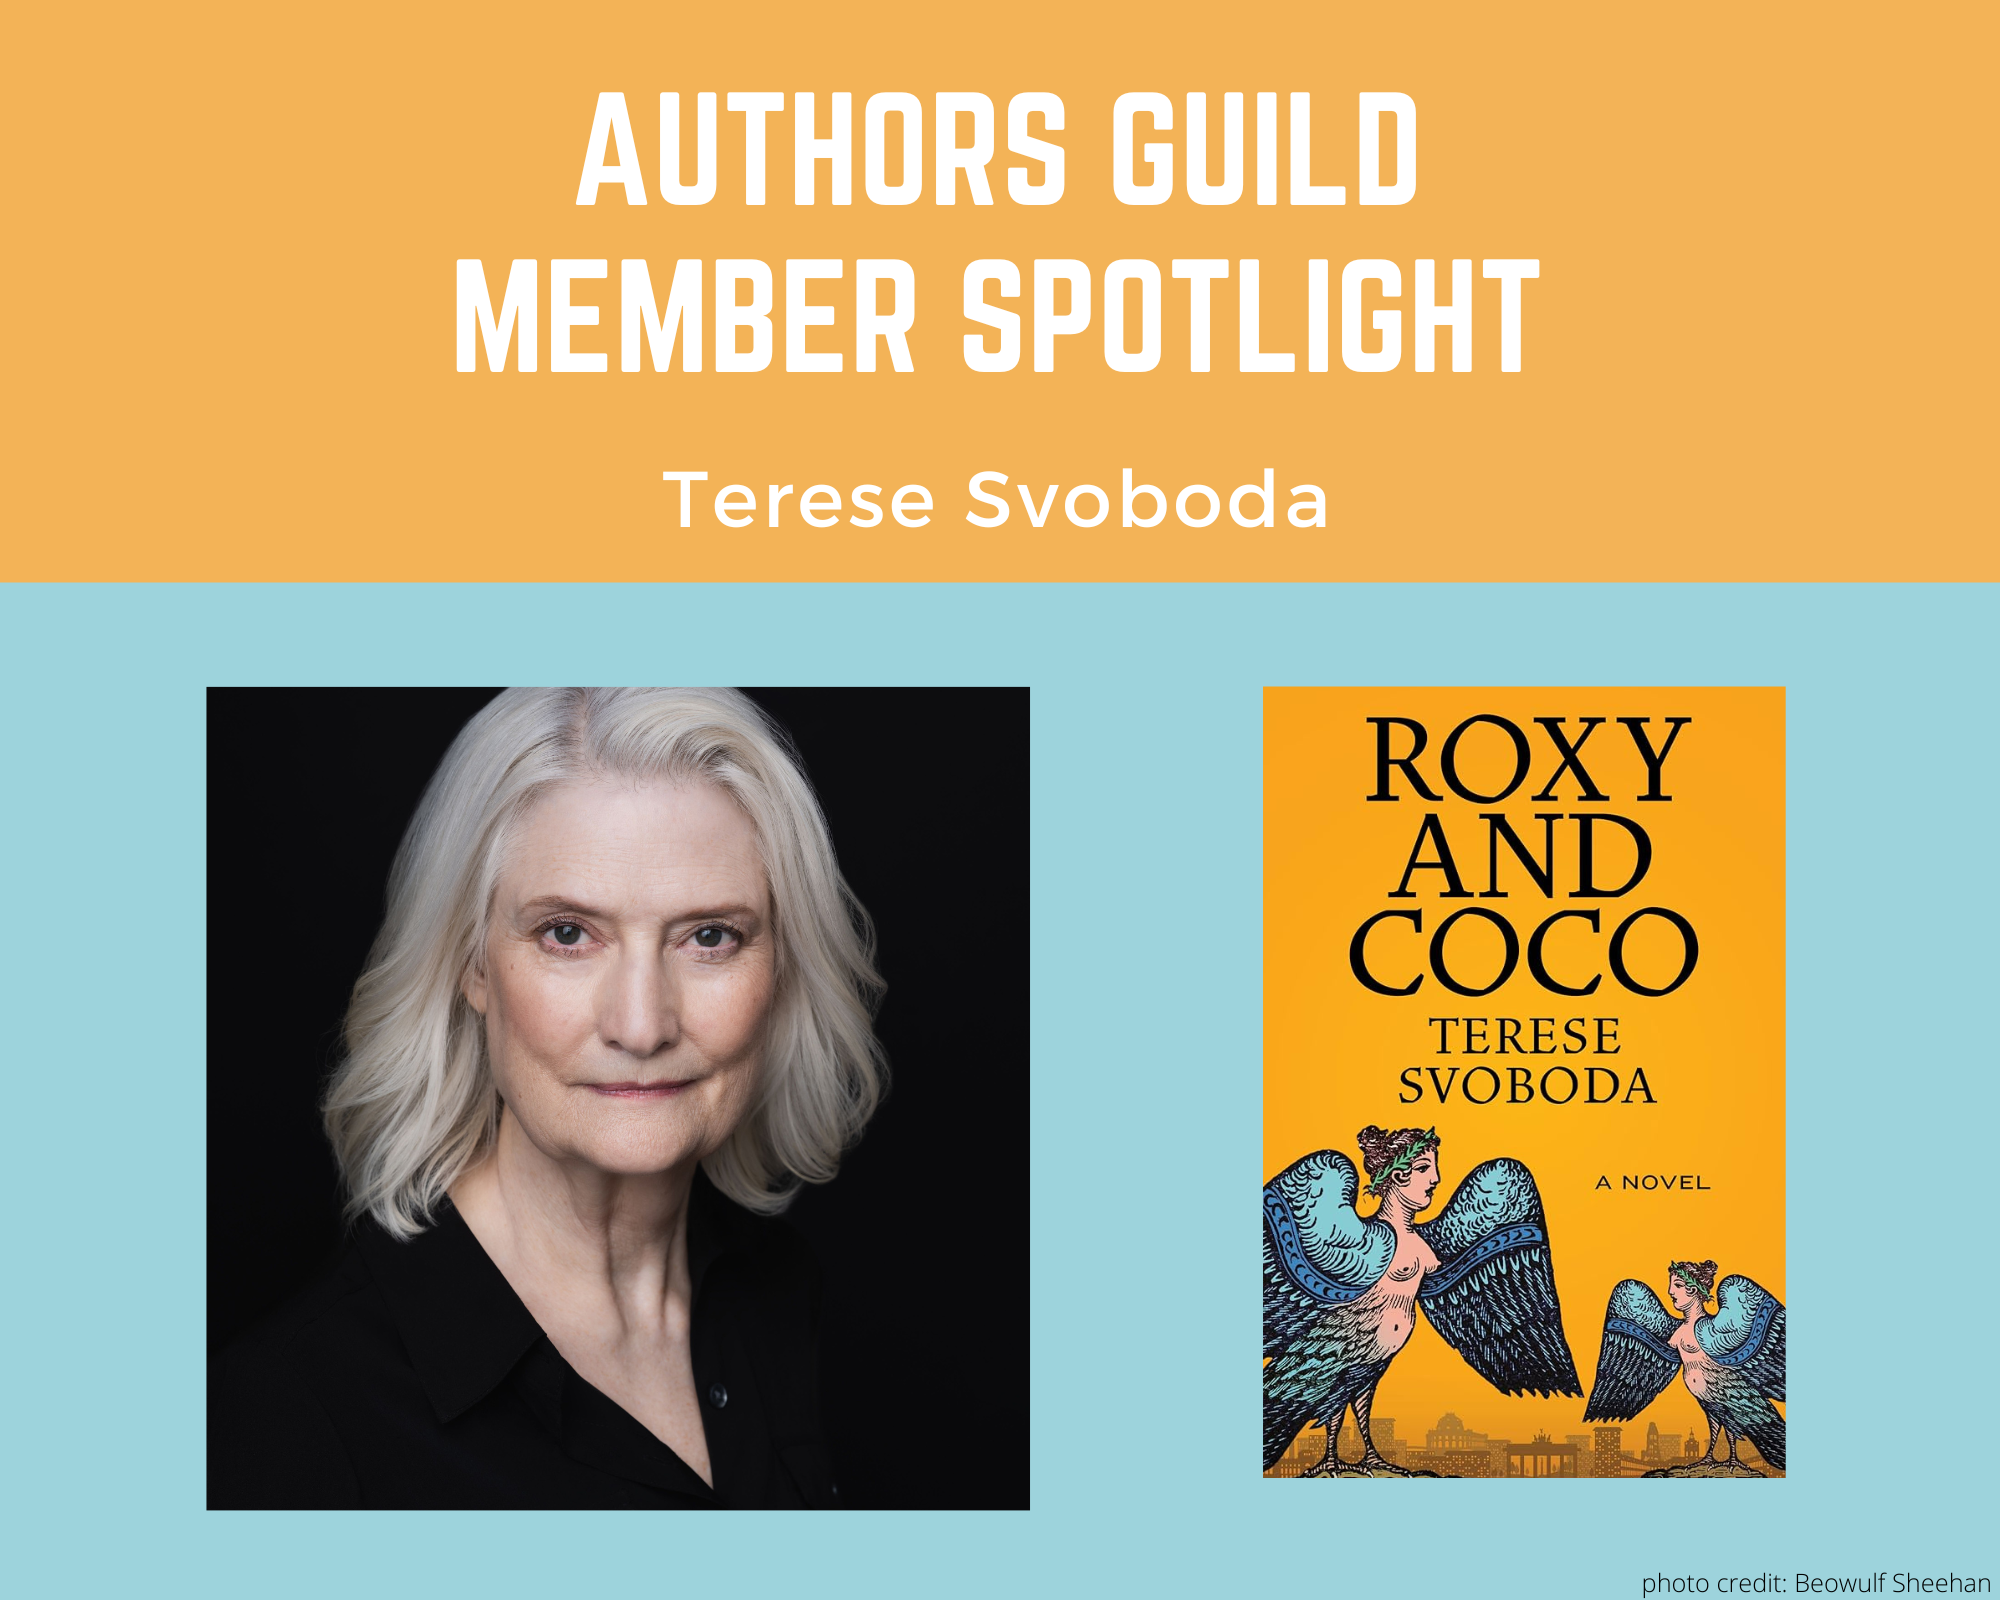 author Terese Svoboda and her book Roxy and Coco